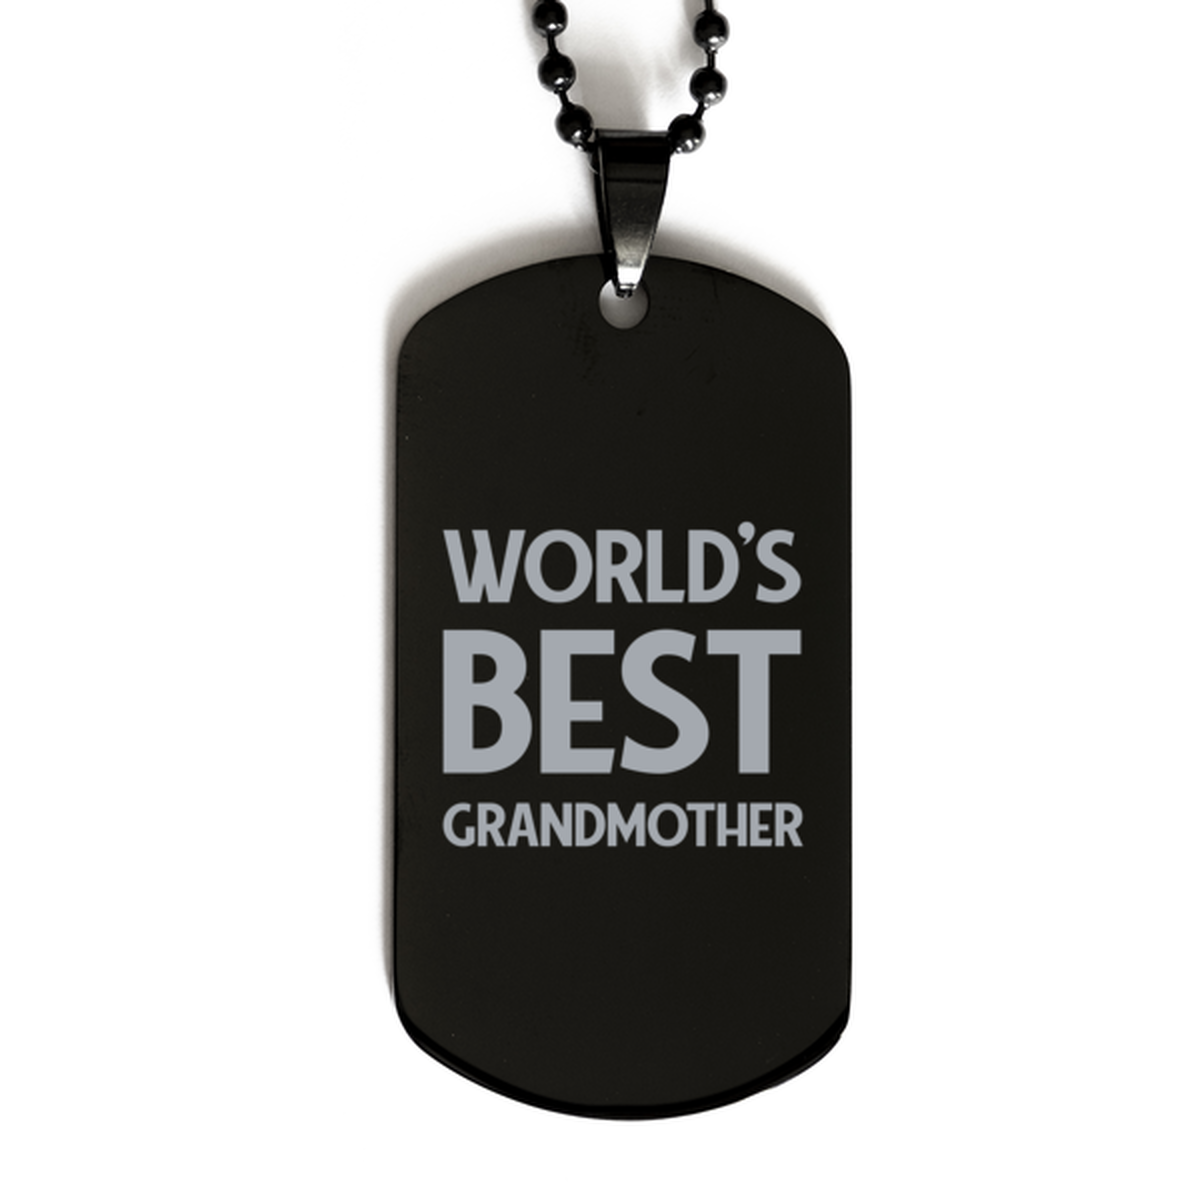 Worlds Best Grandmother Gifts, Funny Black Engraved Dog Tag For Grandmother, Birthday Presents For Women